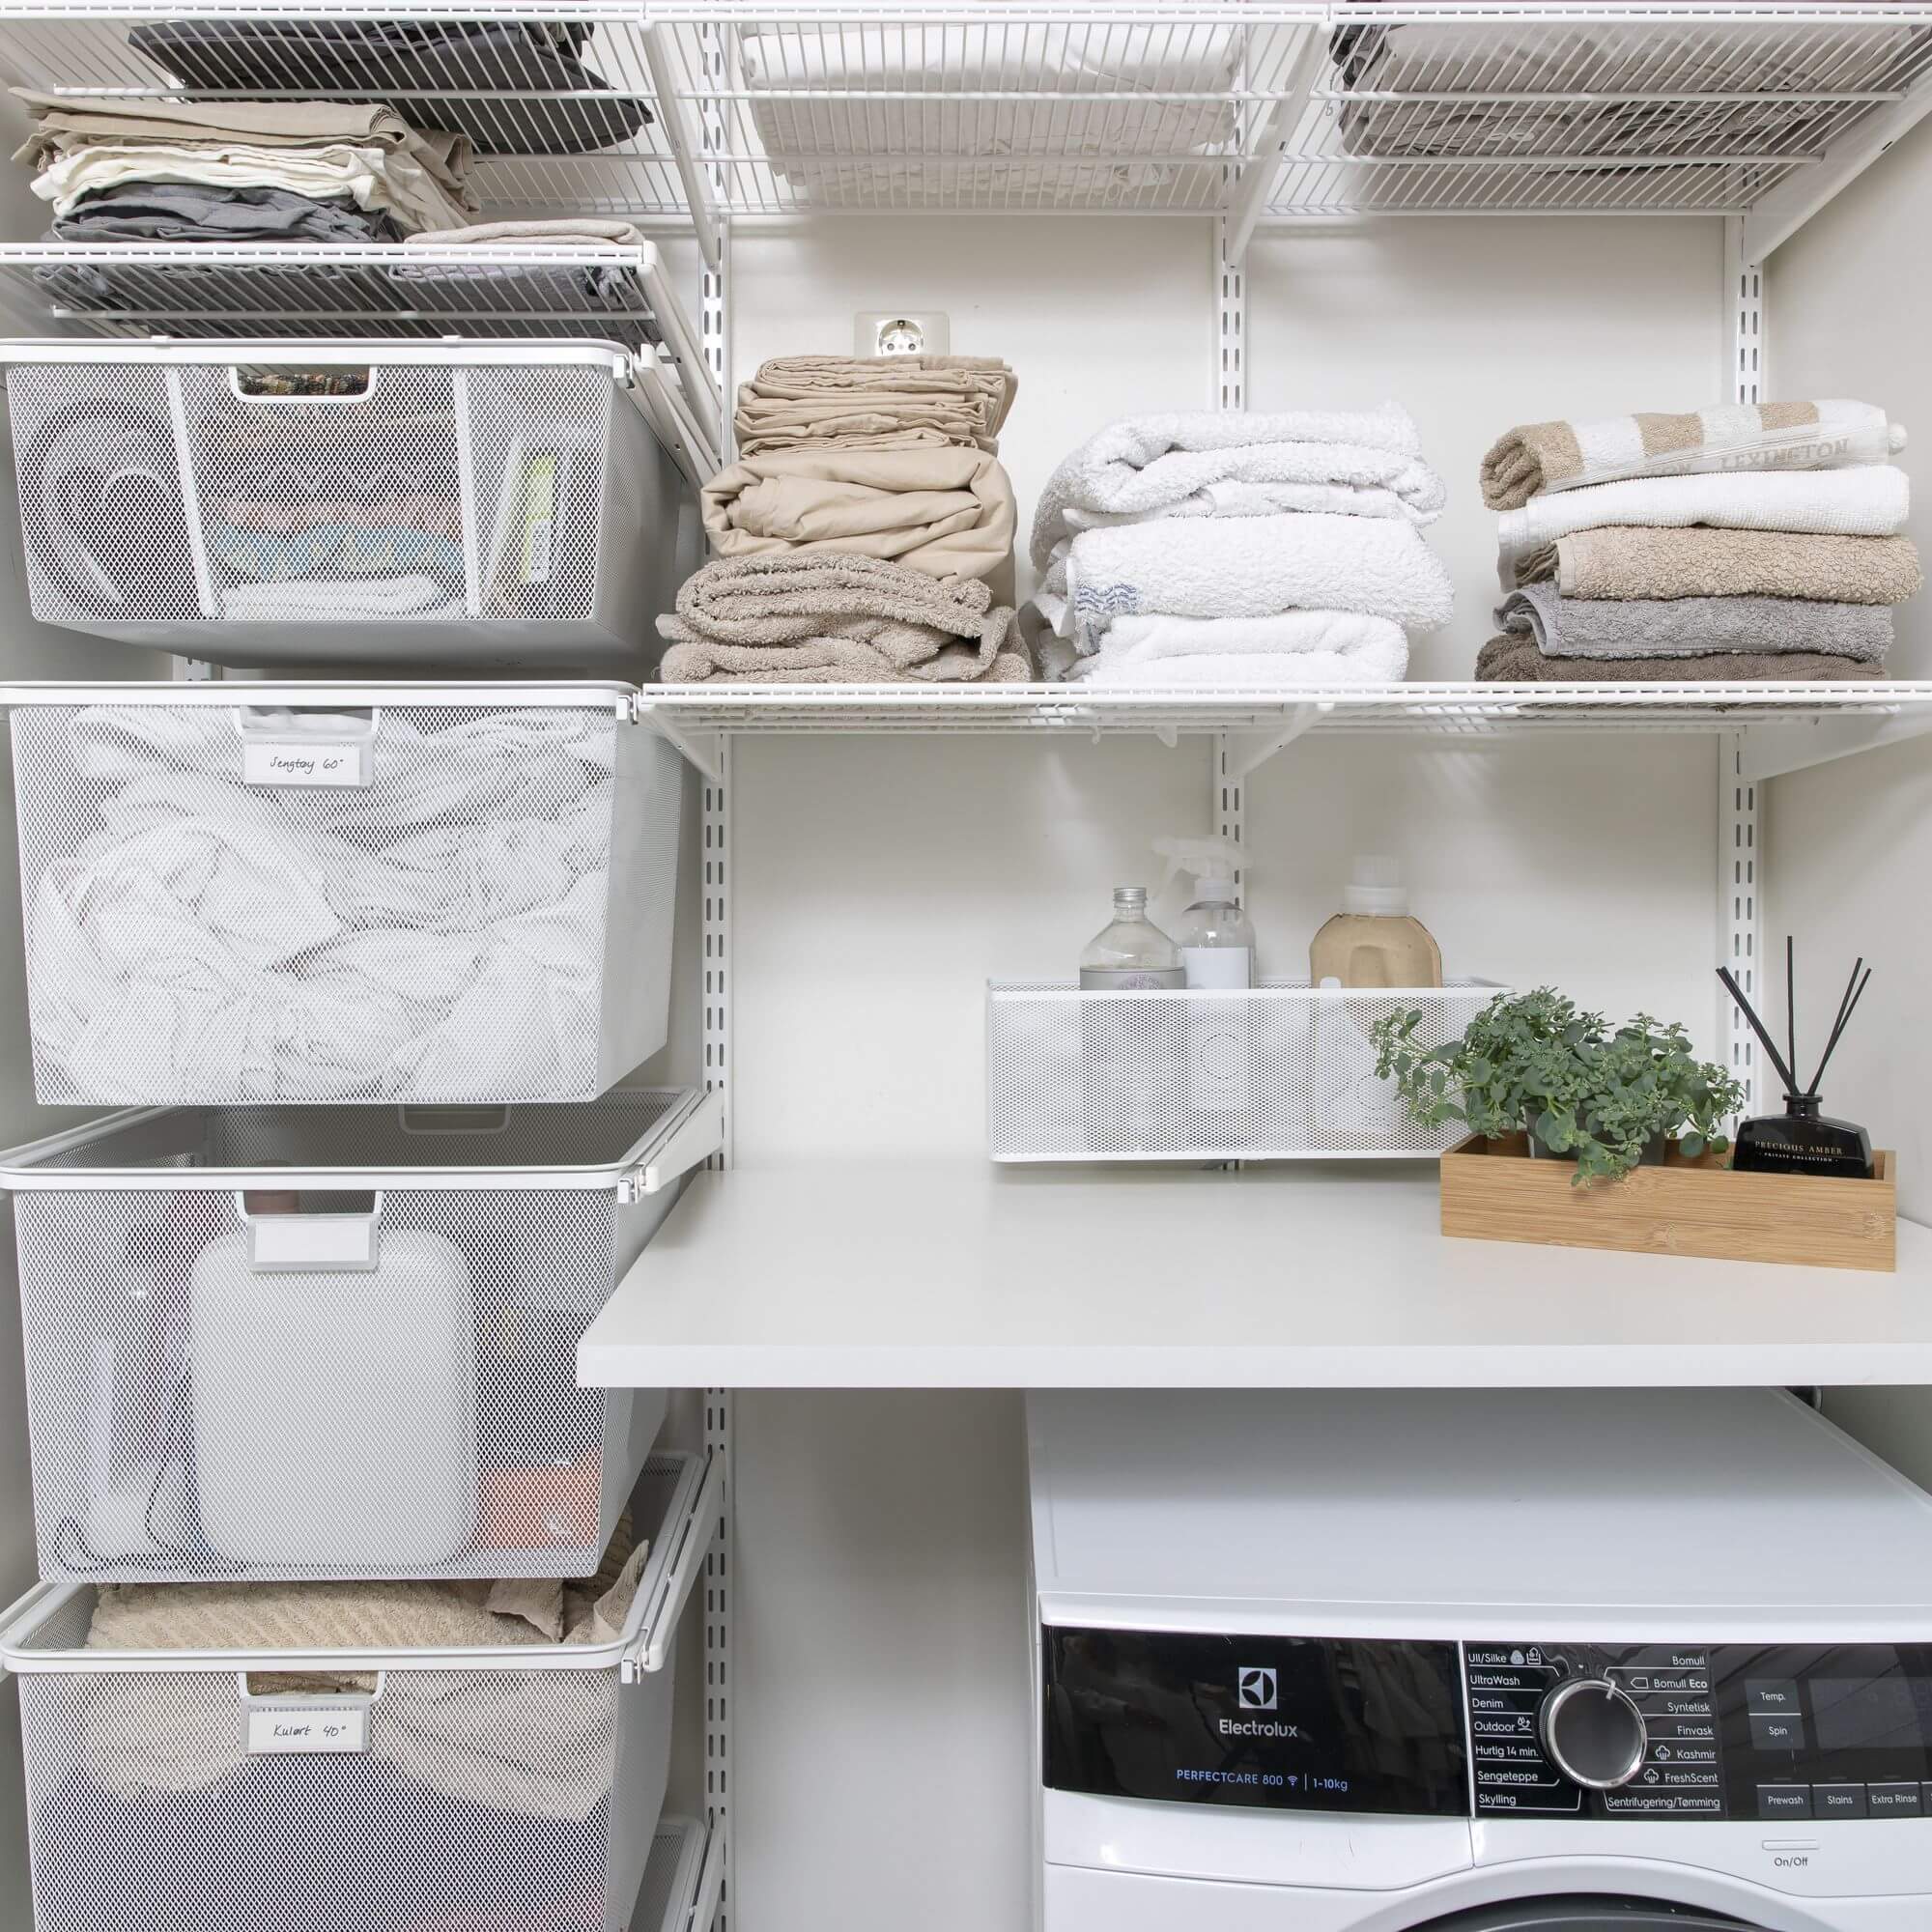 An Elfa laundry shelving system with dirty laundry storage, folded linen and cleaning products